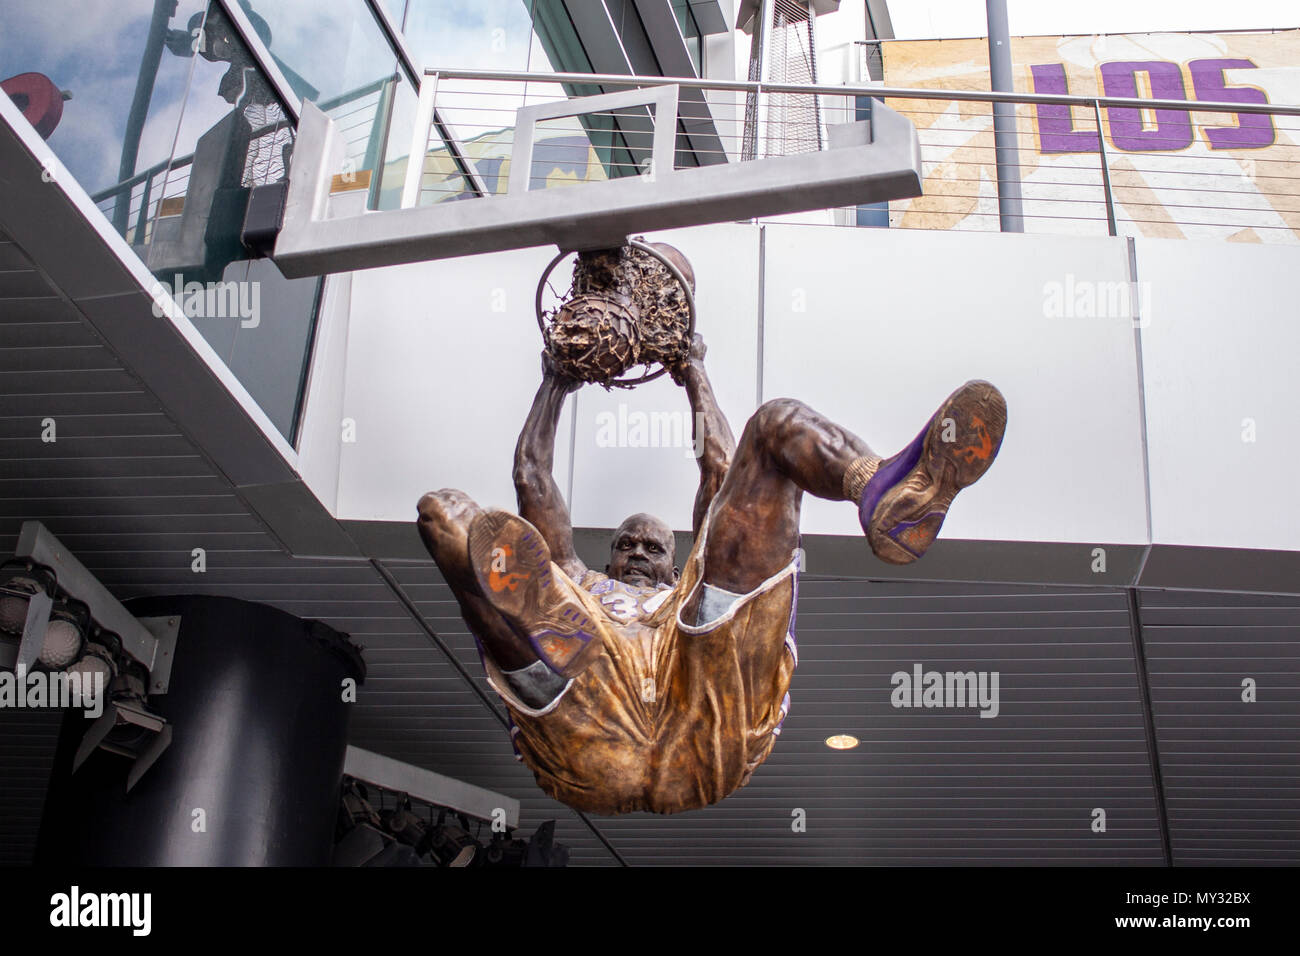 Shaquille O'Neal statue outside Staples Center Stock Photo